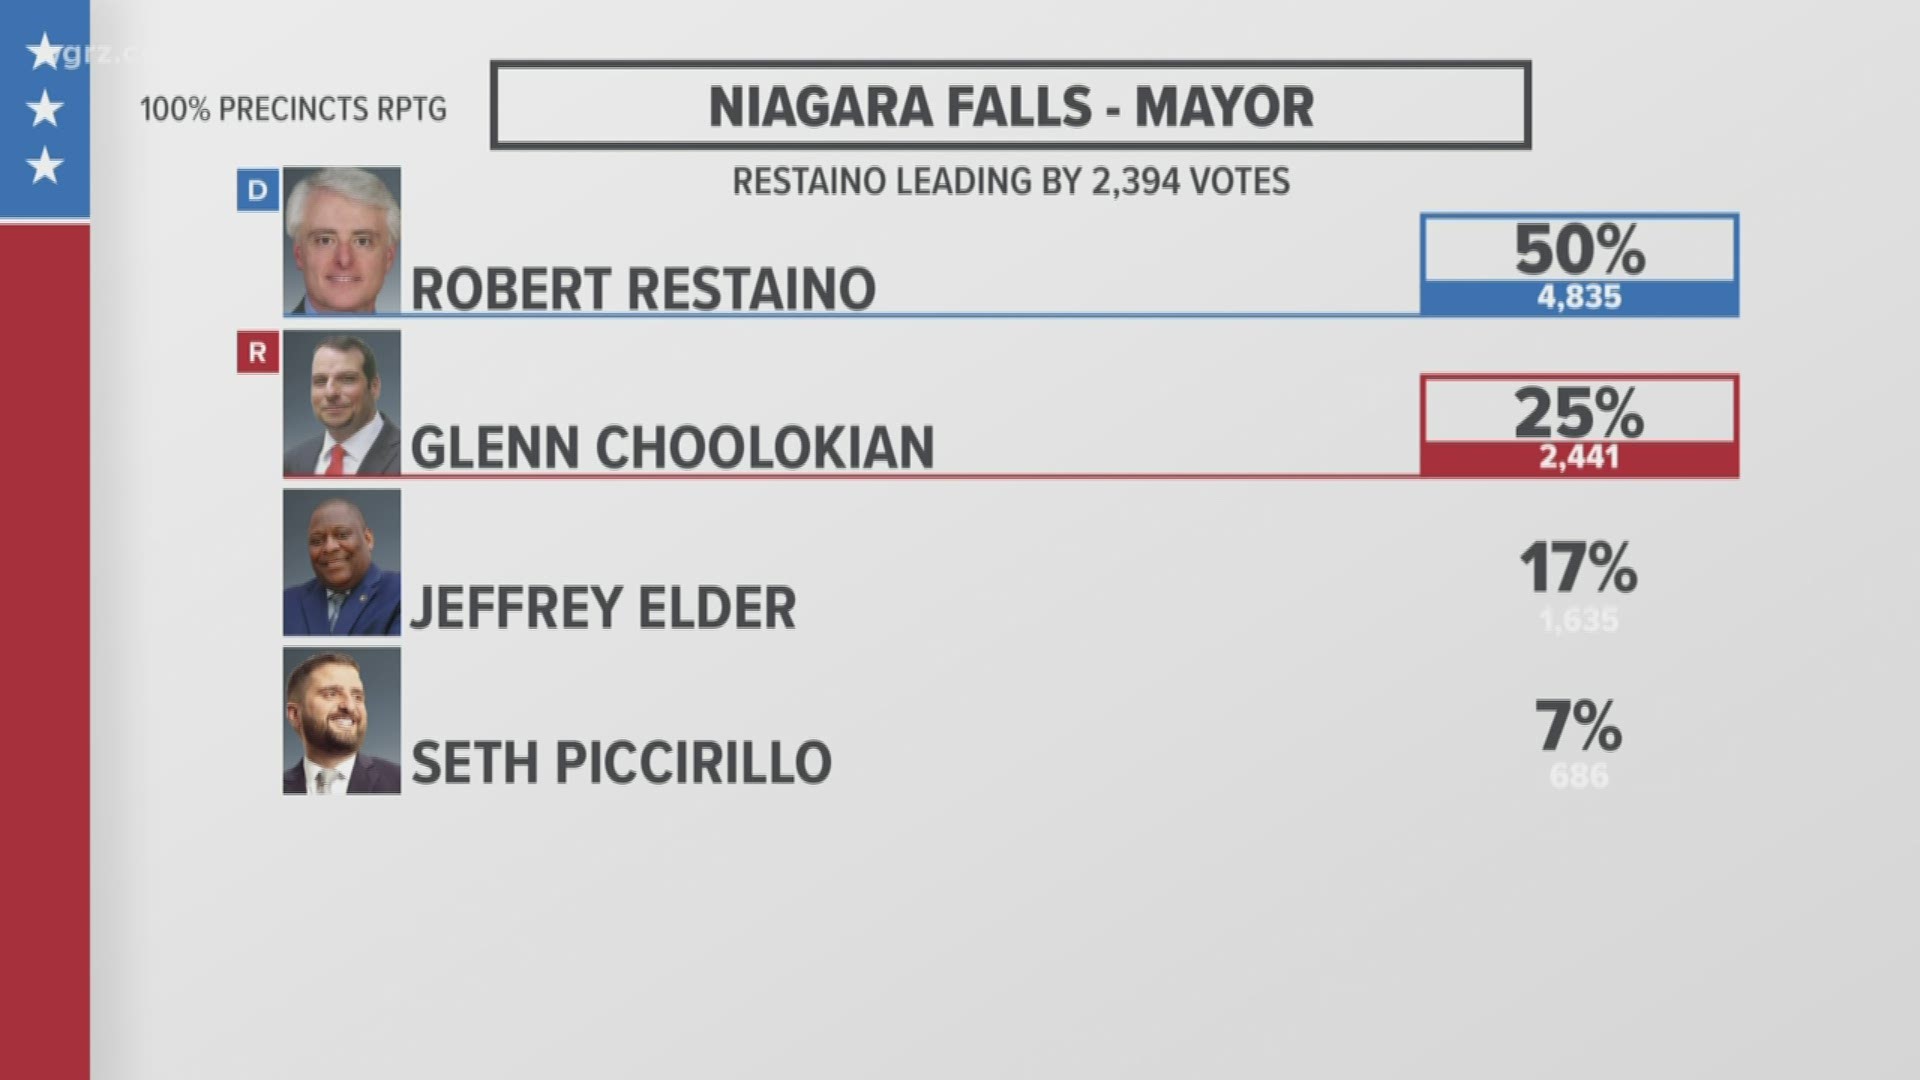 Robert Restaino is the projected winner for the mayor of Niagara Falls.